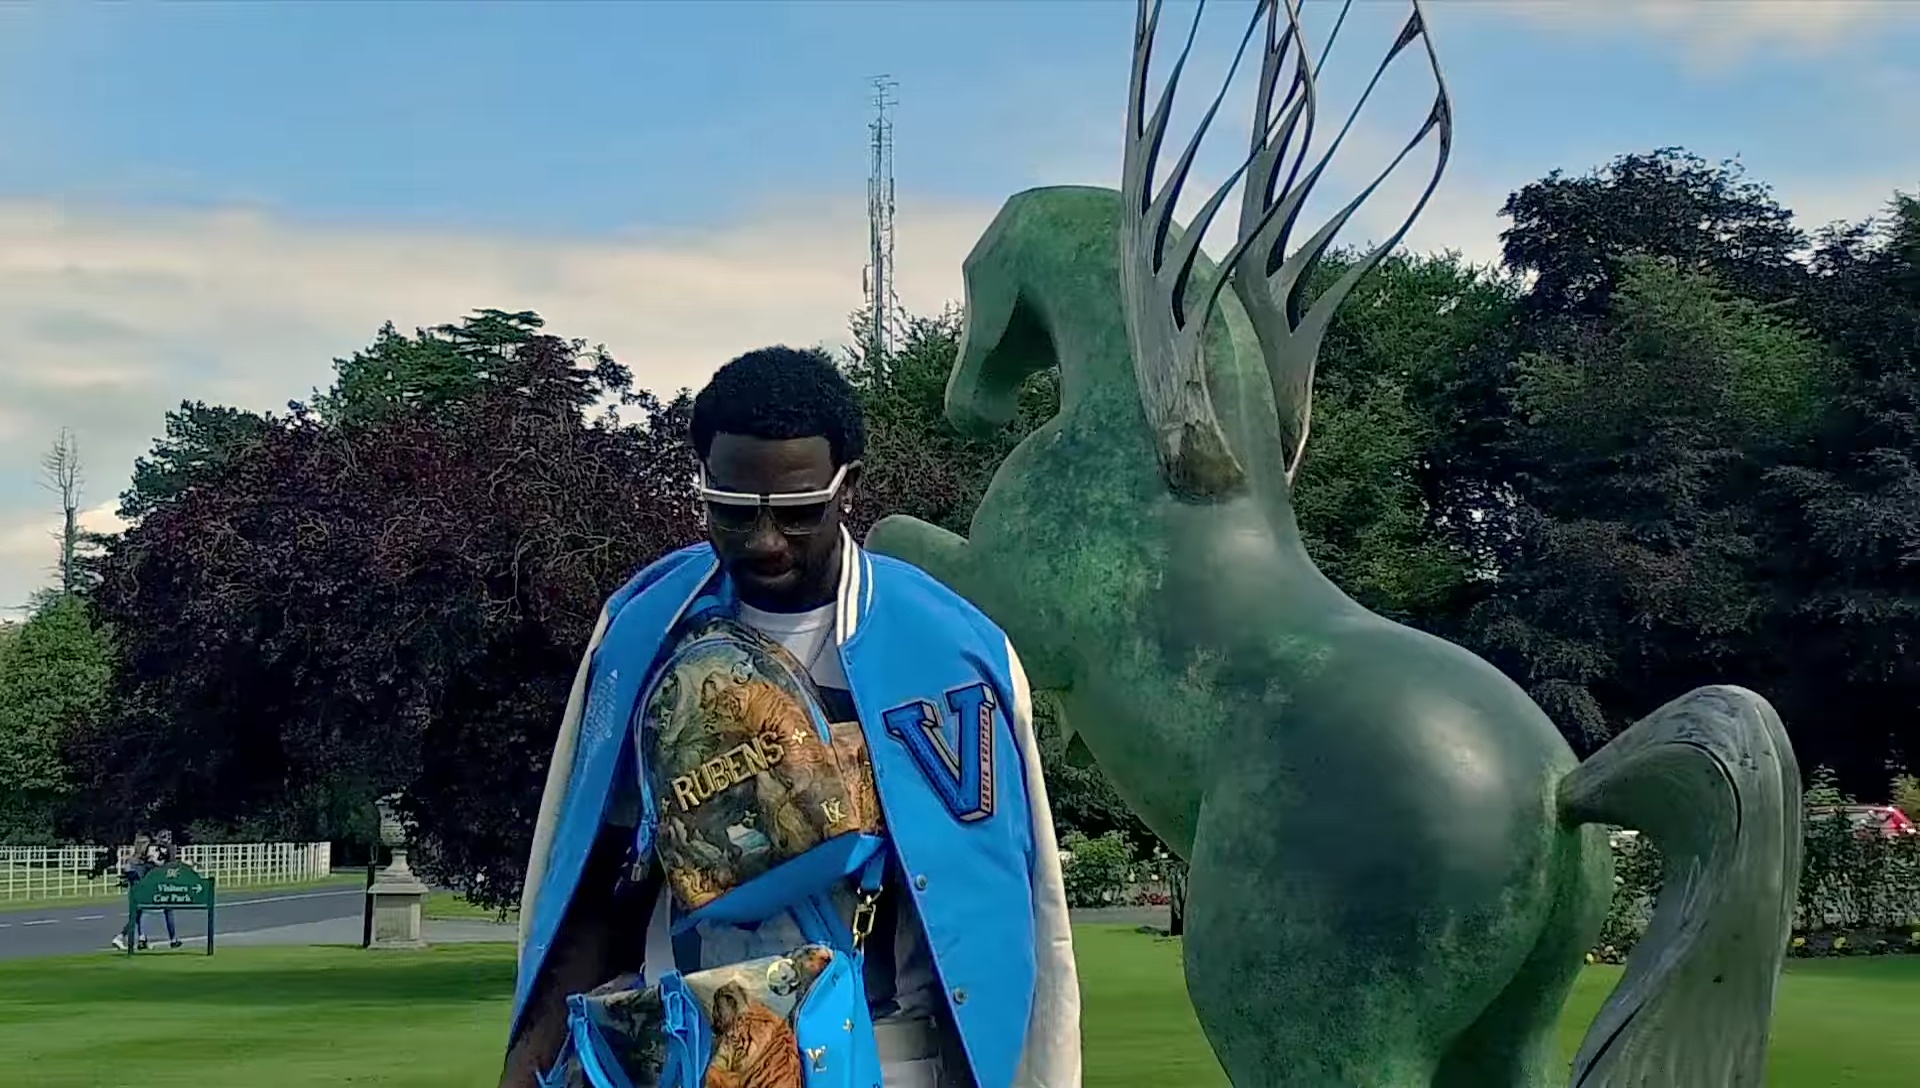 Rubens in Masters LV X Koons Bags and Clothing in Members Only by Gucci Mane (2017)